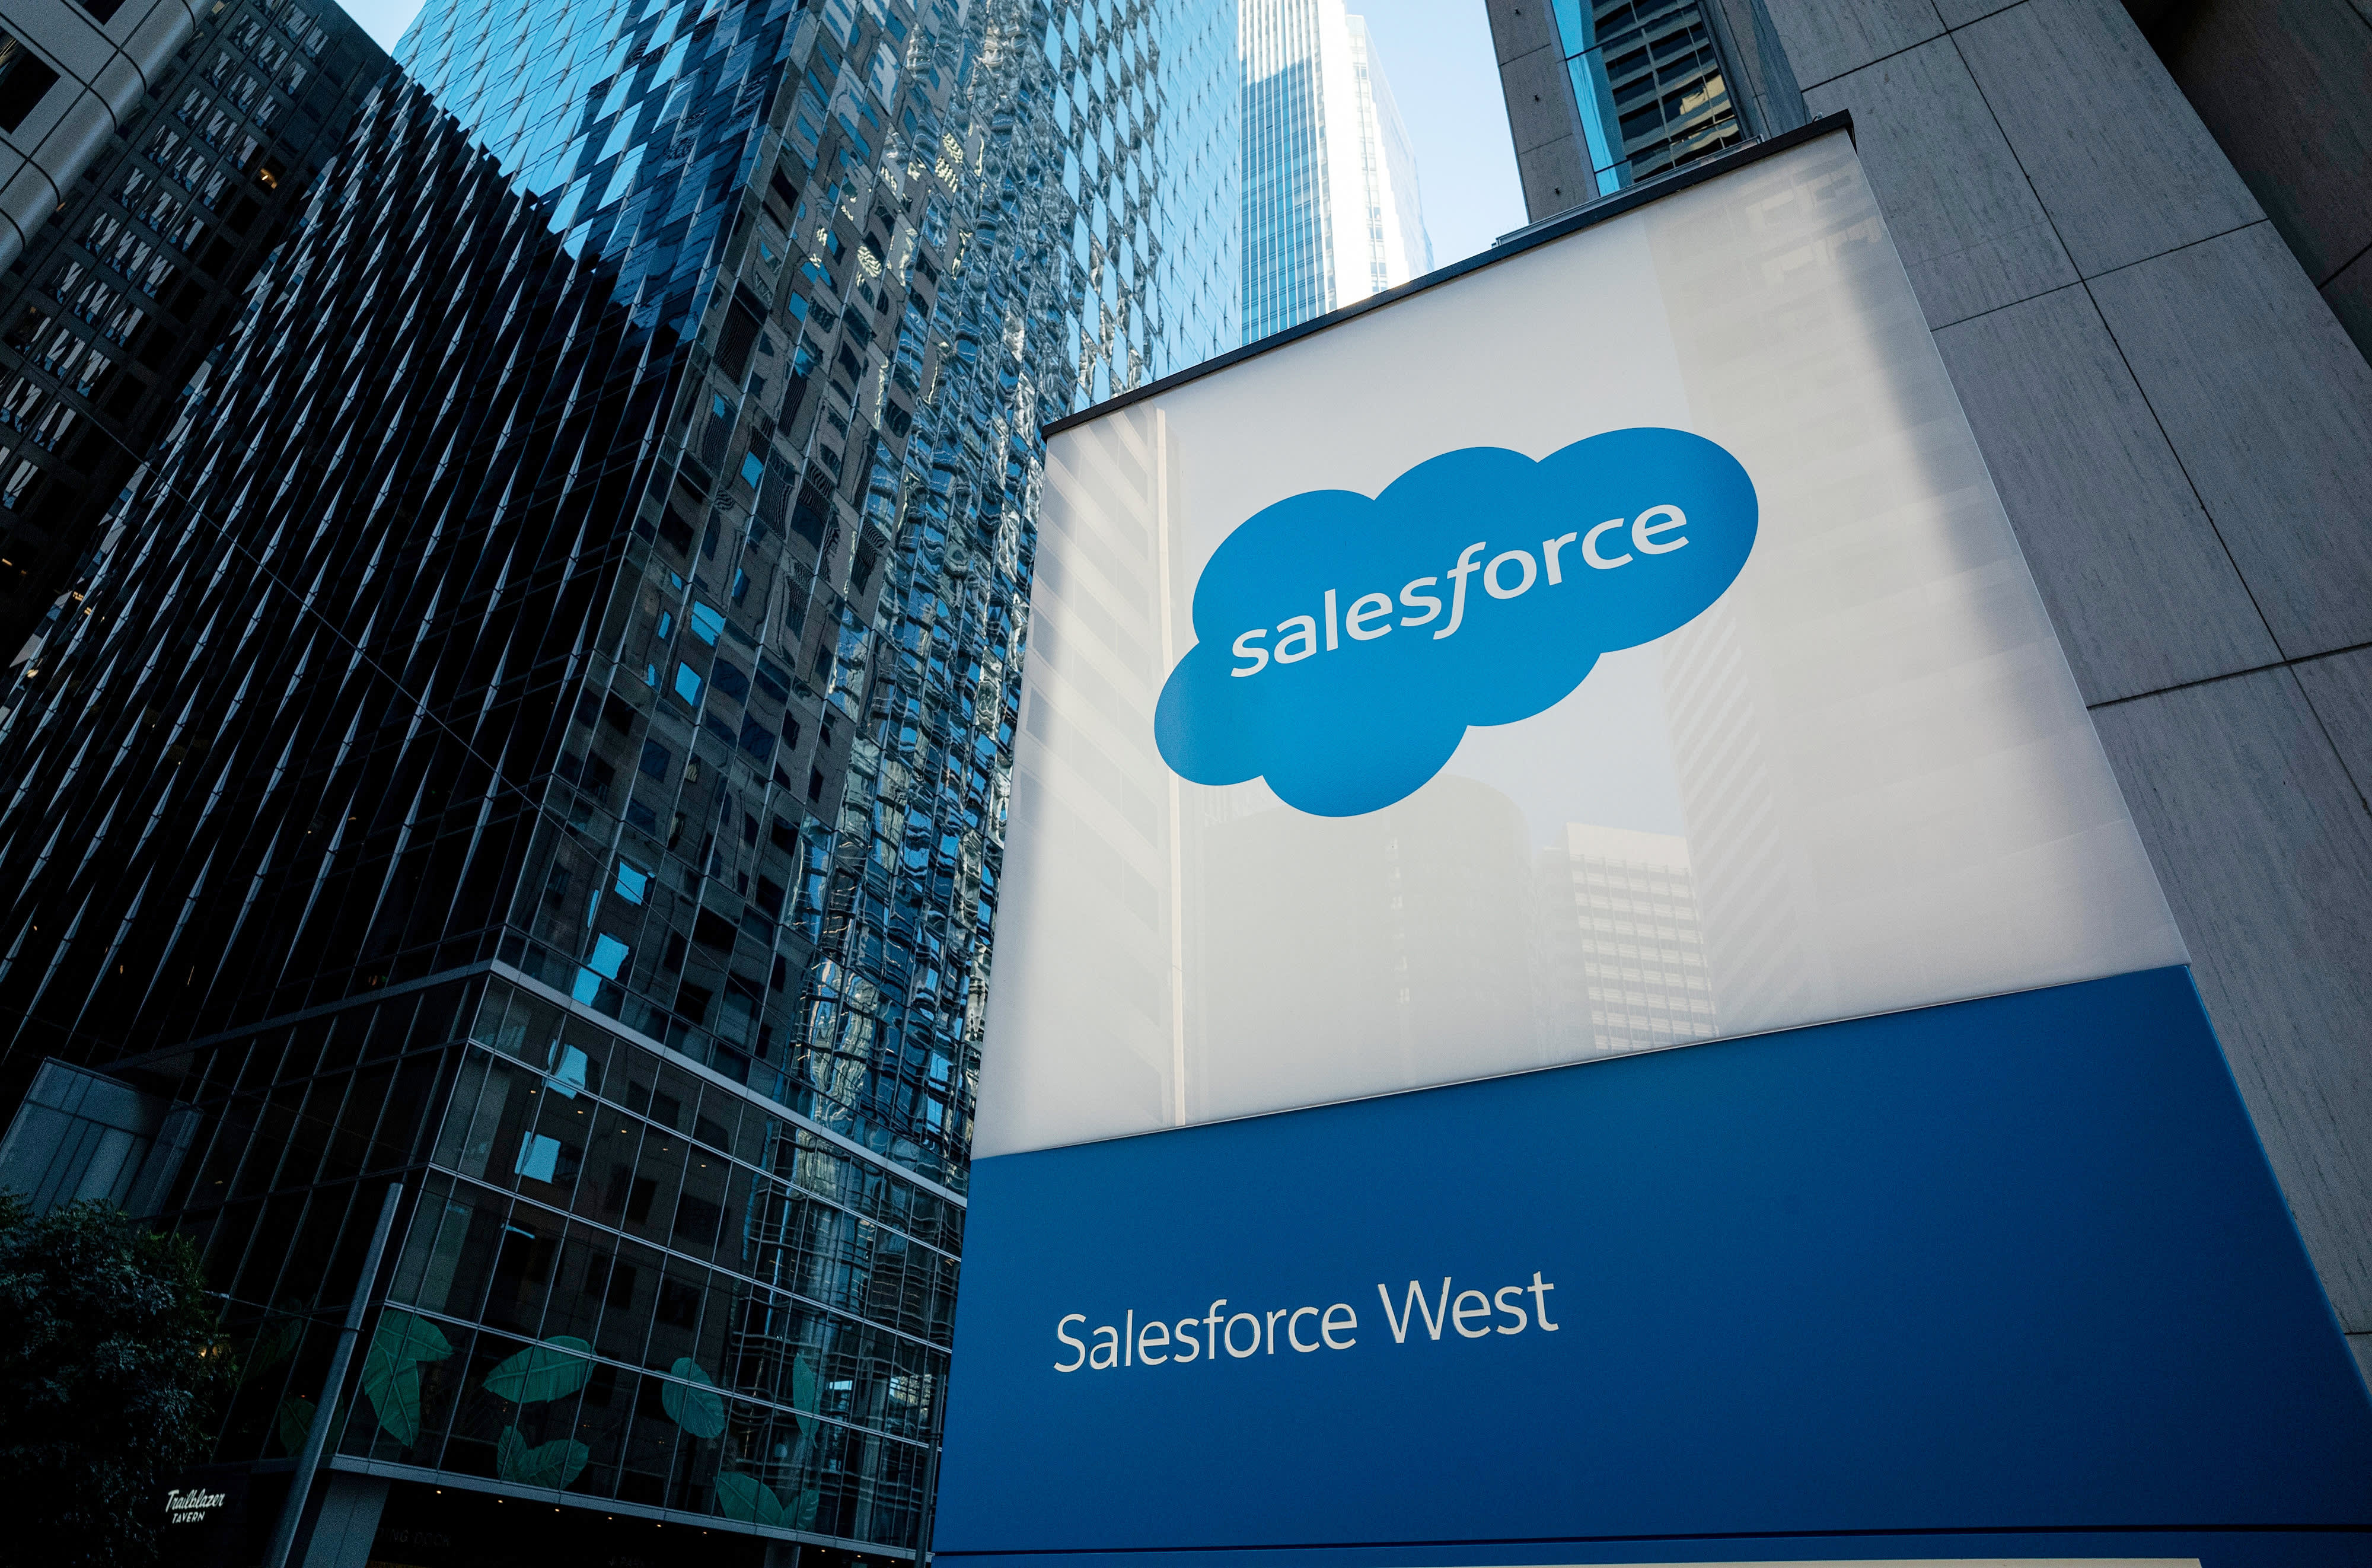 How Wall Street pros traded seven of our club stocks, including Salesforce, during the first quarter